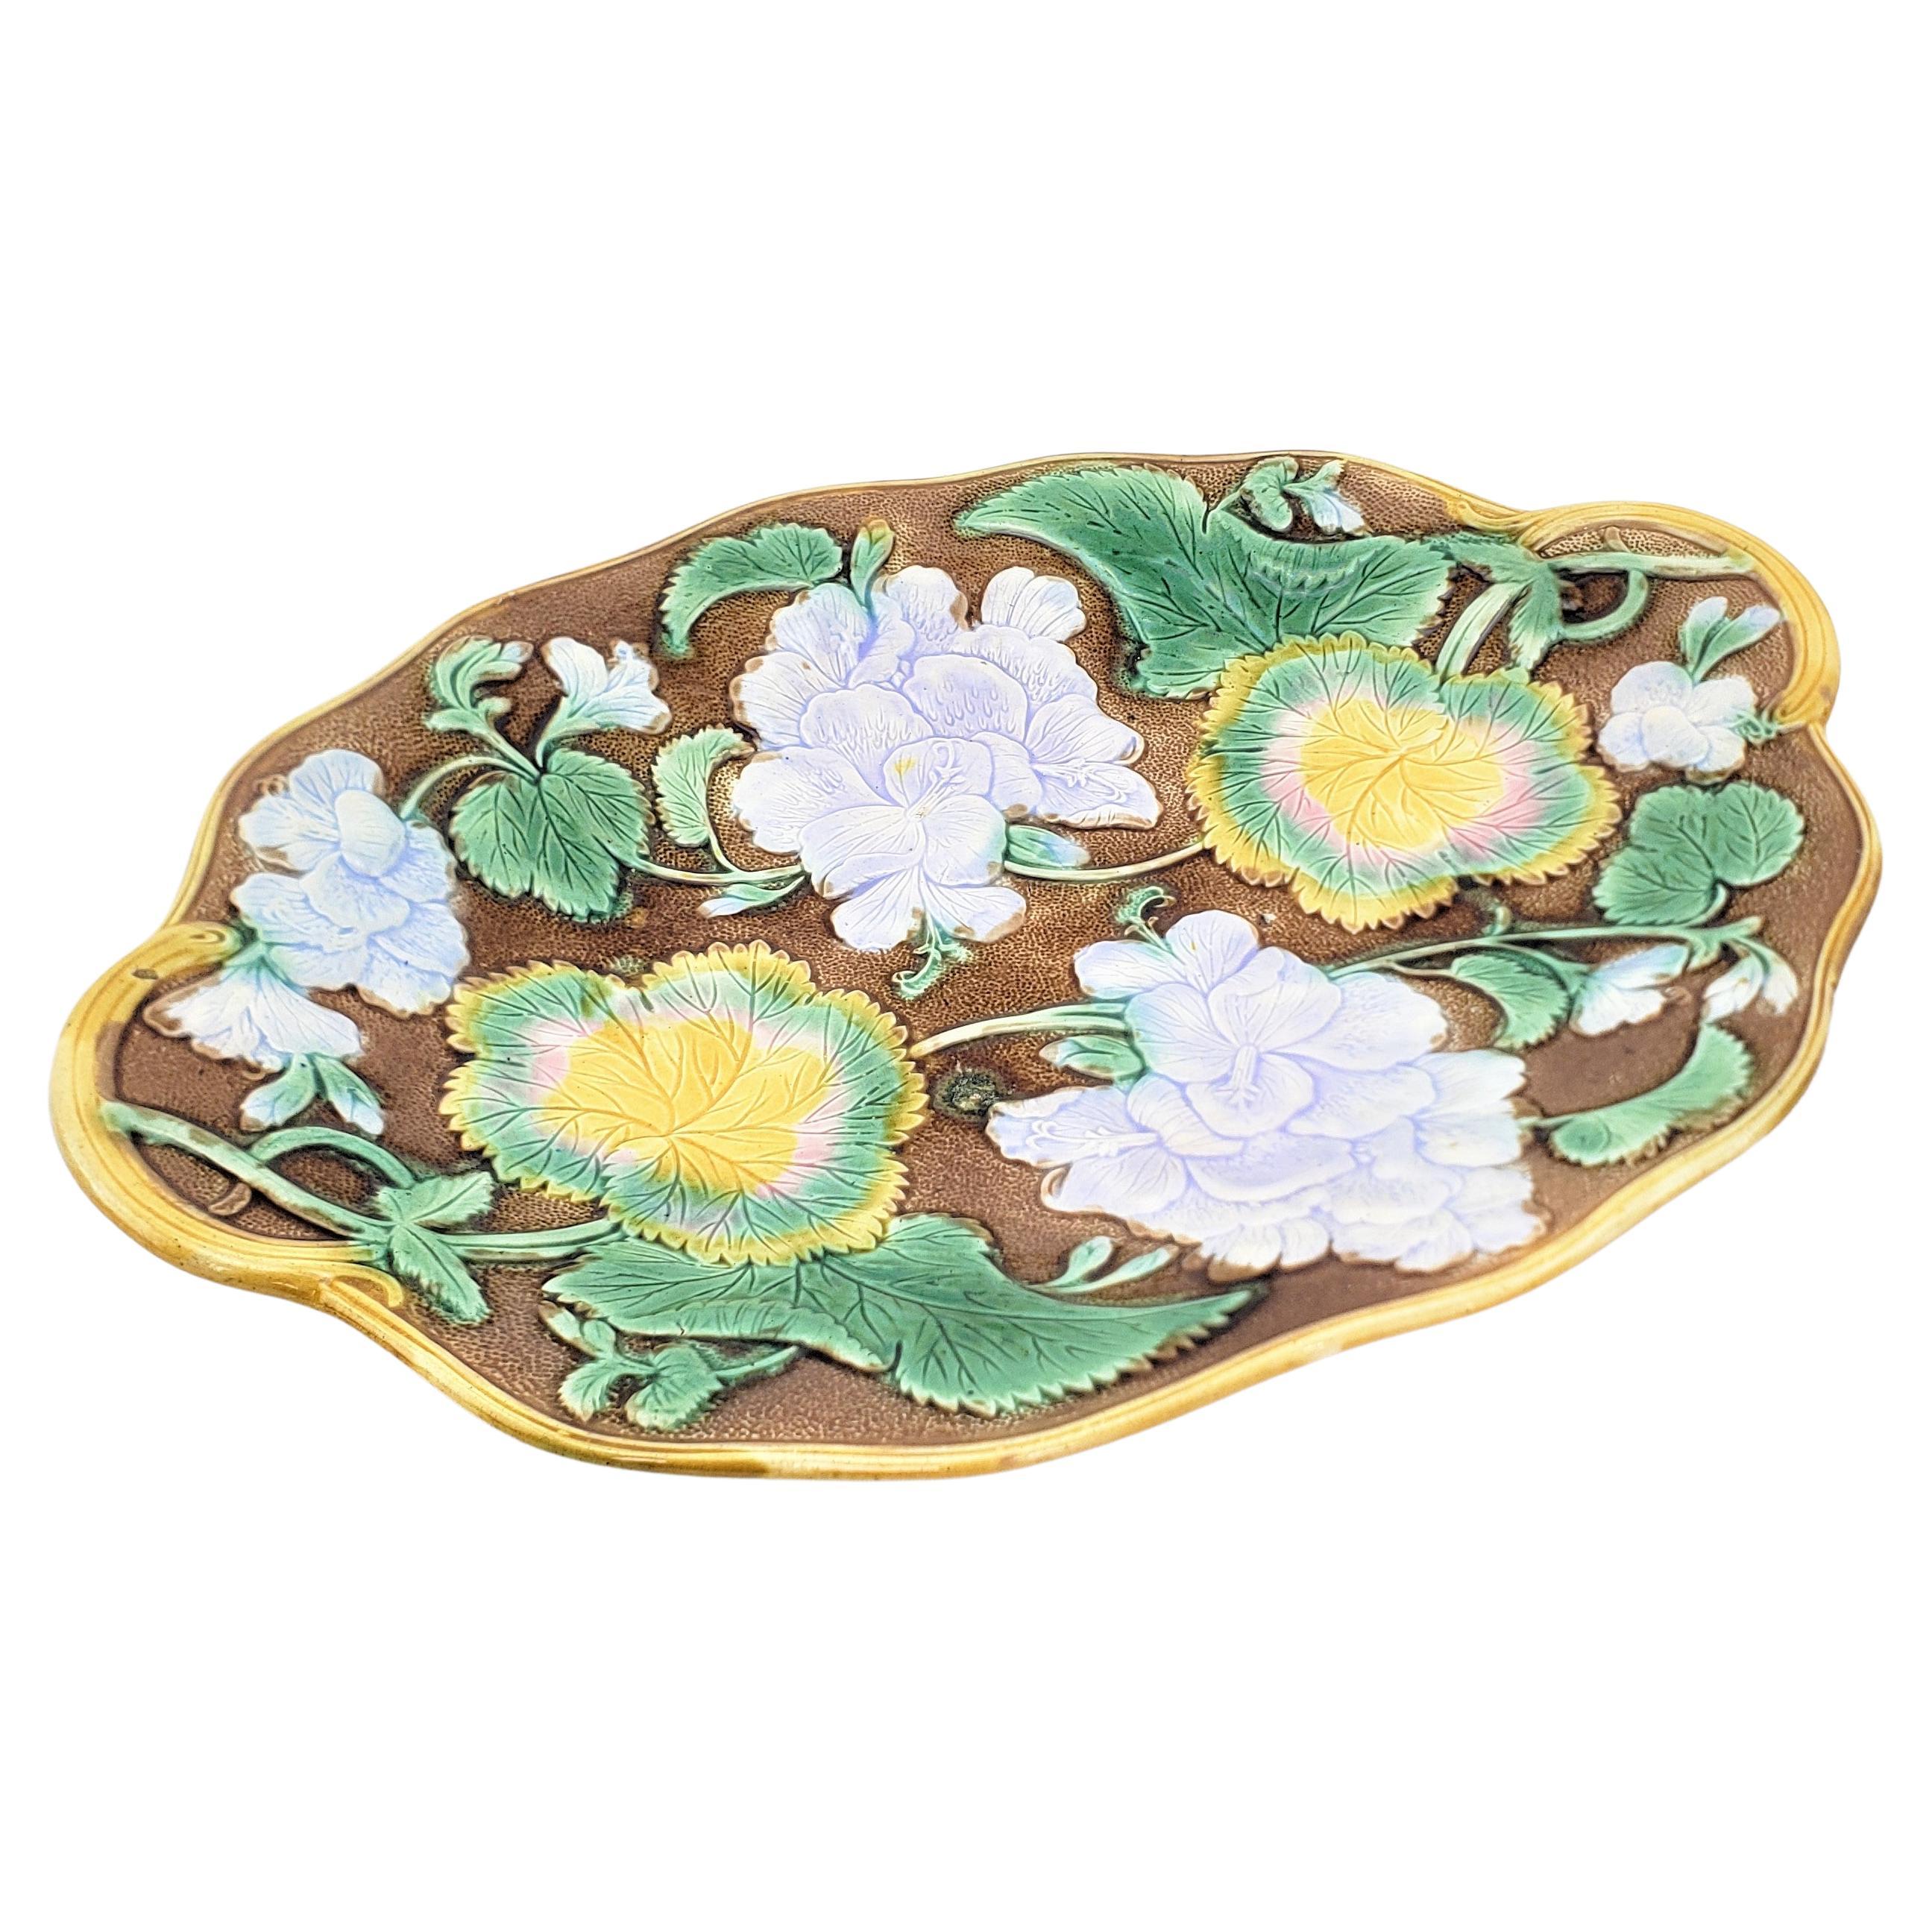 Small Antique Majolica Serving Dish or Platter with Leaf & Flower Decoration For Sale